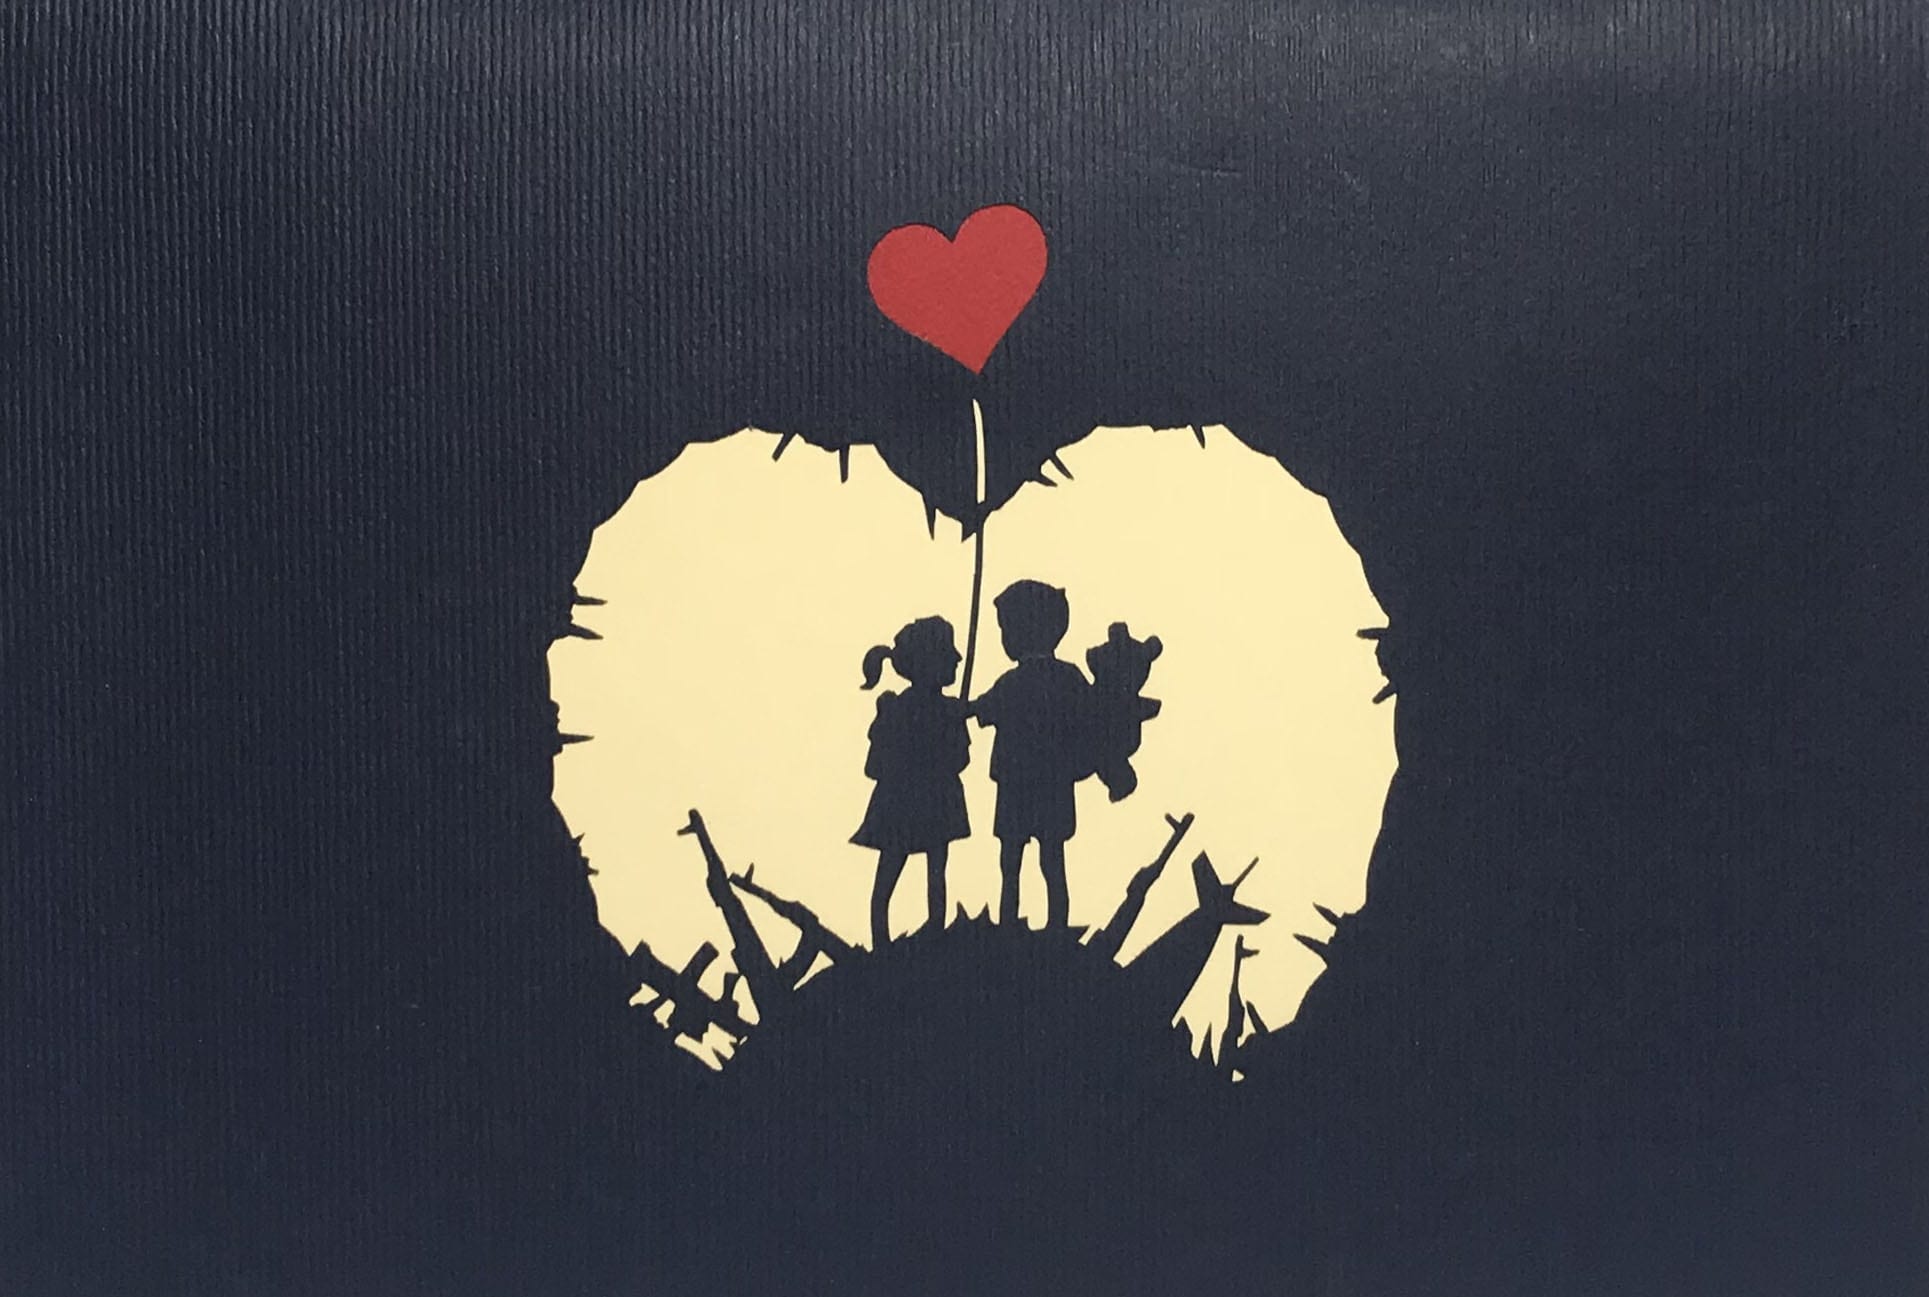 silhouettes of a young boy and girl as they stand with each other on a hill of weapons and instruments of mass destruction.